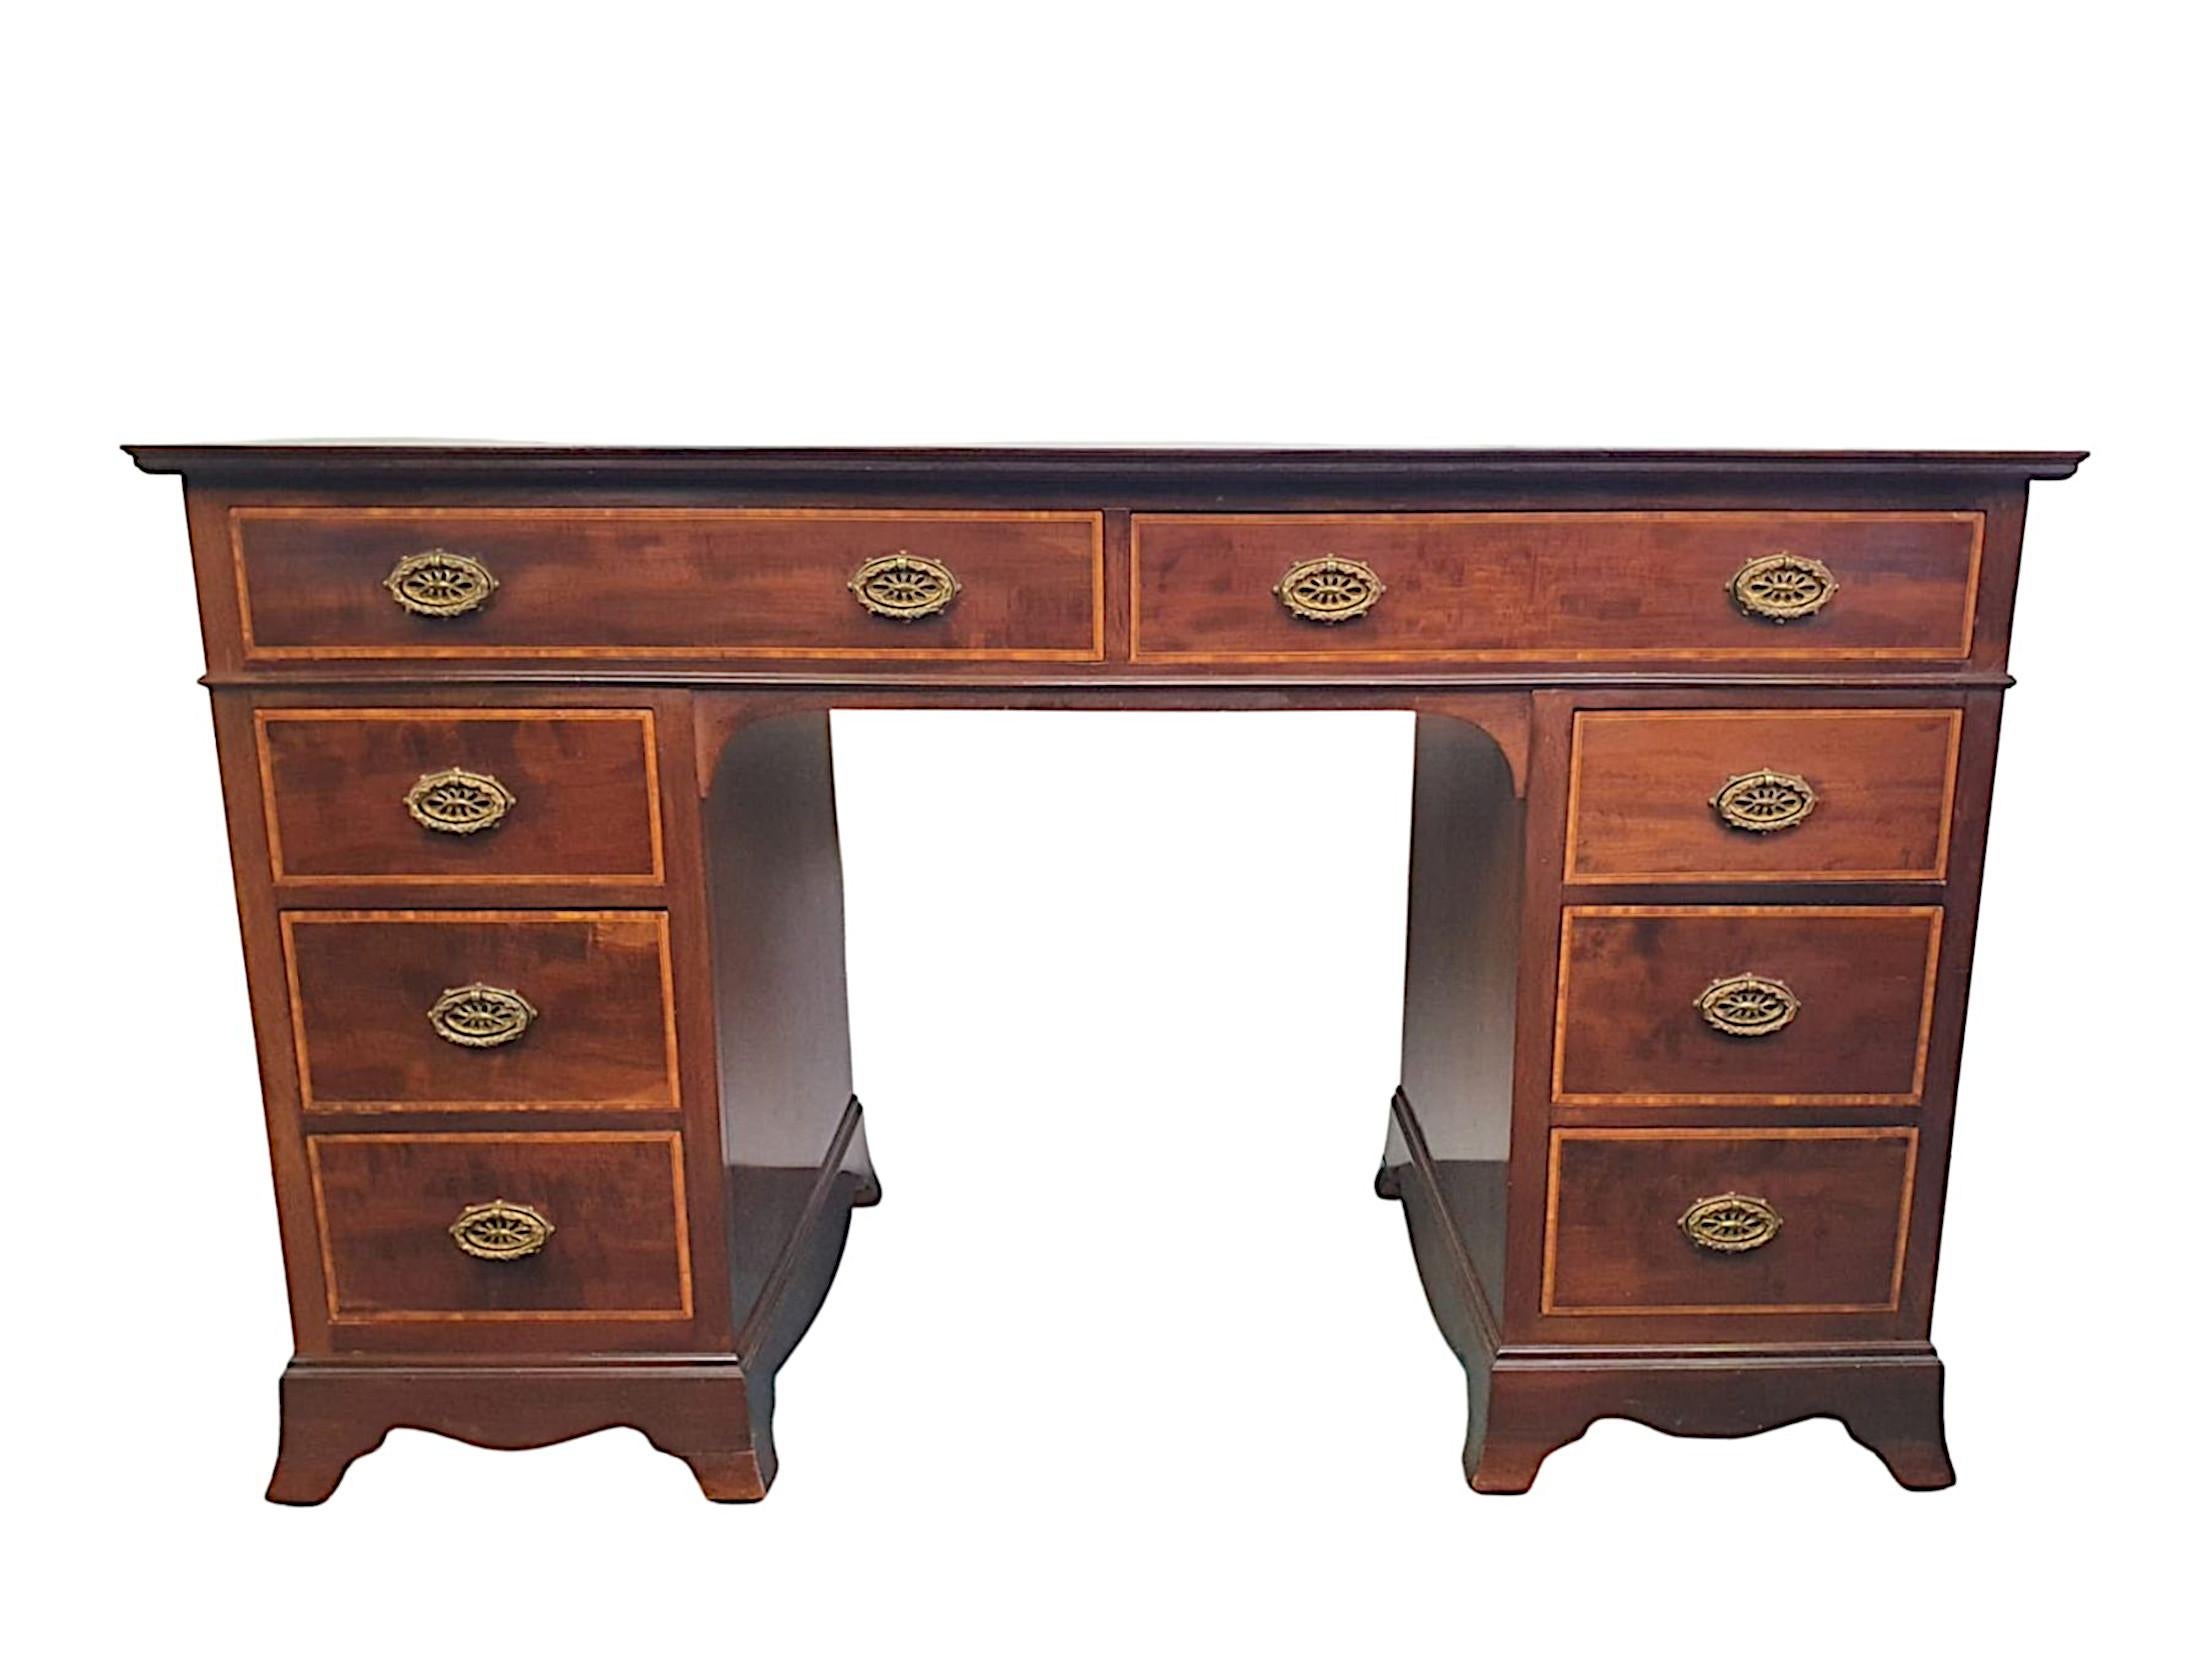 A very fine Edwardian mahogany and satinwood line inlaid pedestal desk, the moulded top inset with gilt embossed red tooled leather writing skiver surface raised over frieze with two long cockbeaded line inlaid drawers with decorative brass ring